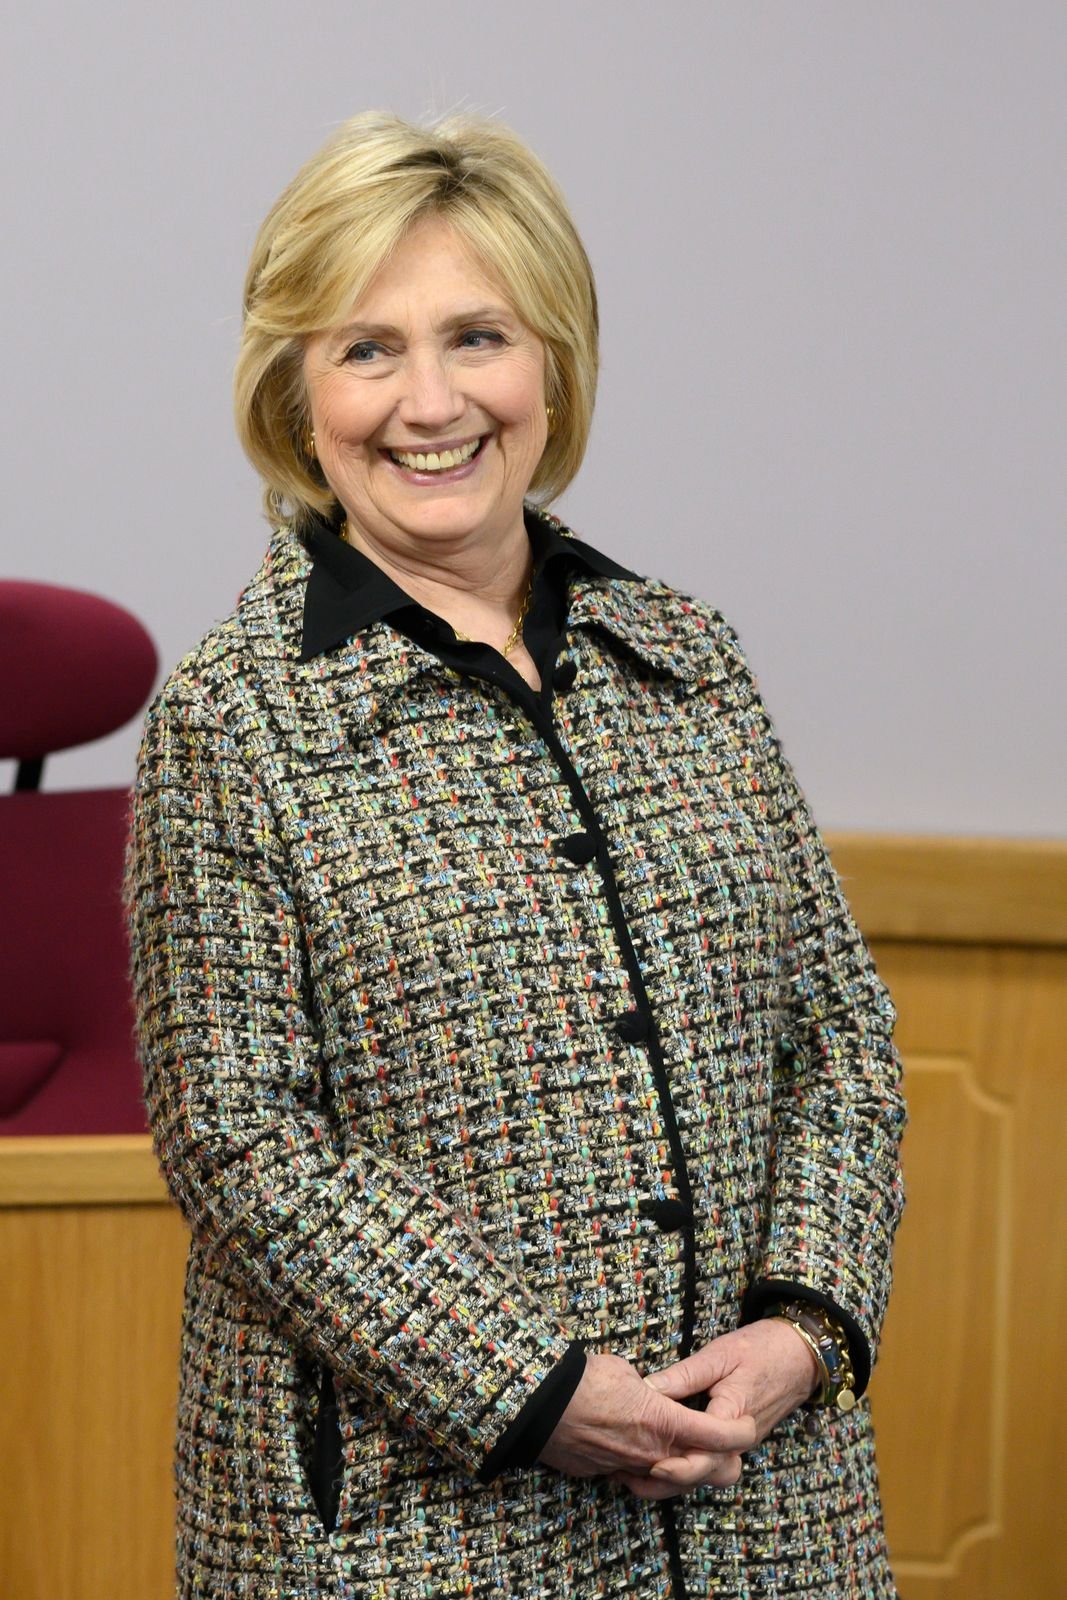 Hillary Clinton visits Swansea University on November 14, 2019, in Swansea, Wales | Photo: Matthew Horwood/Getty Images